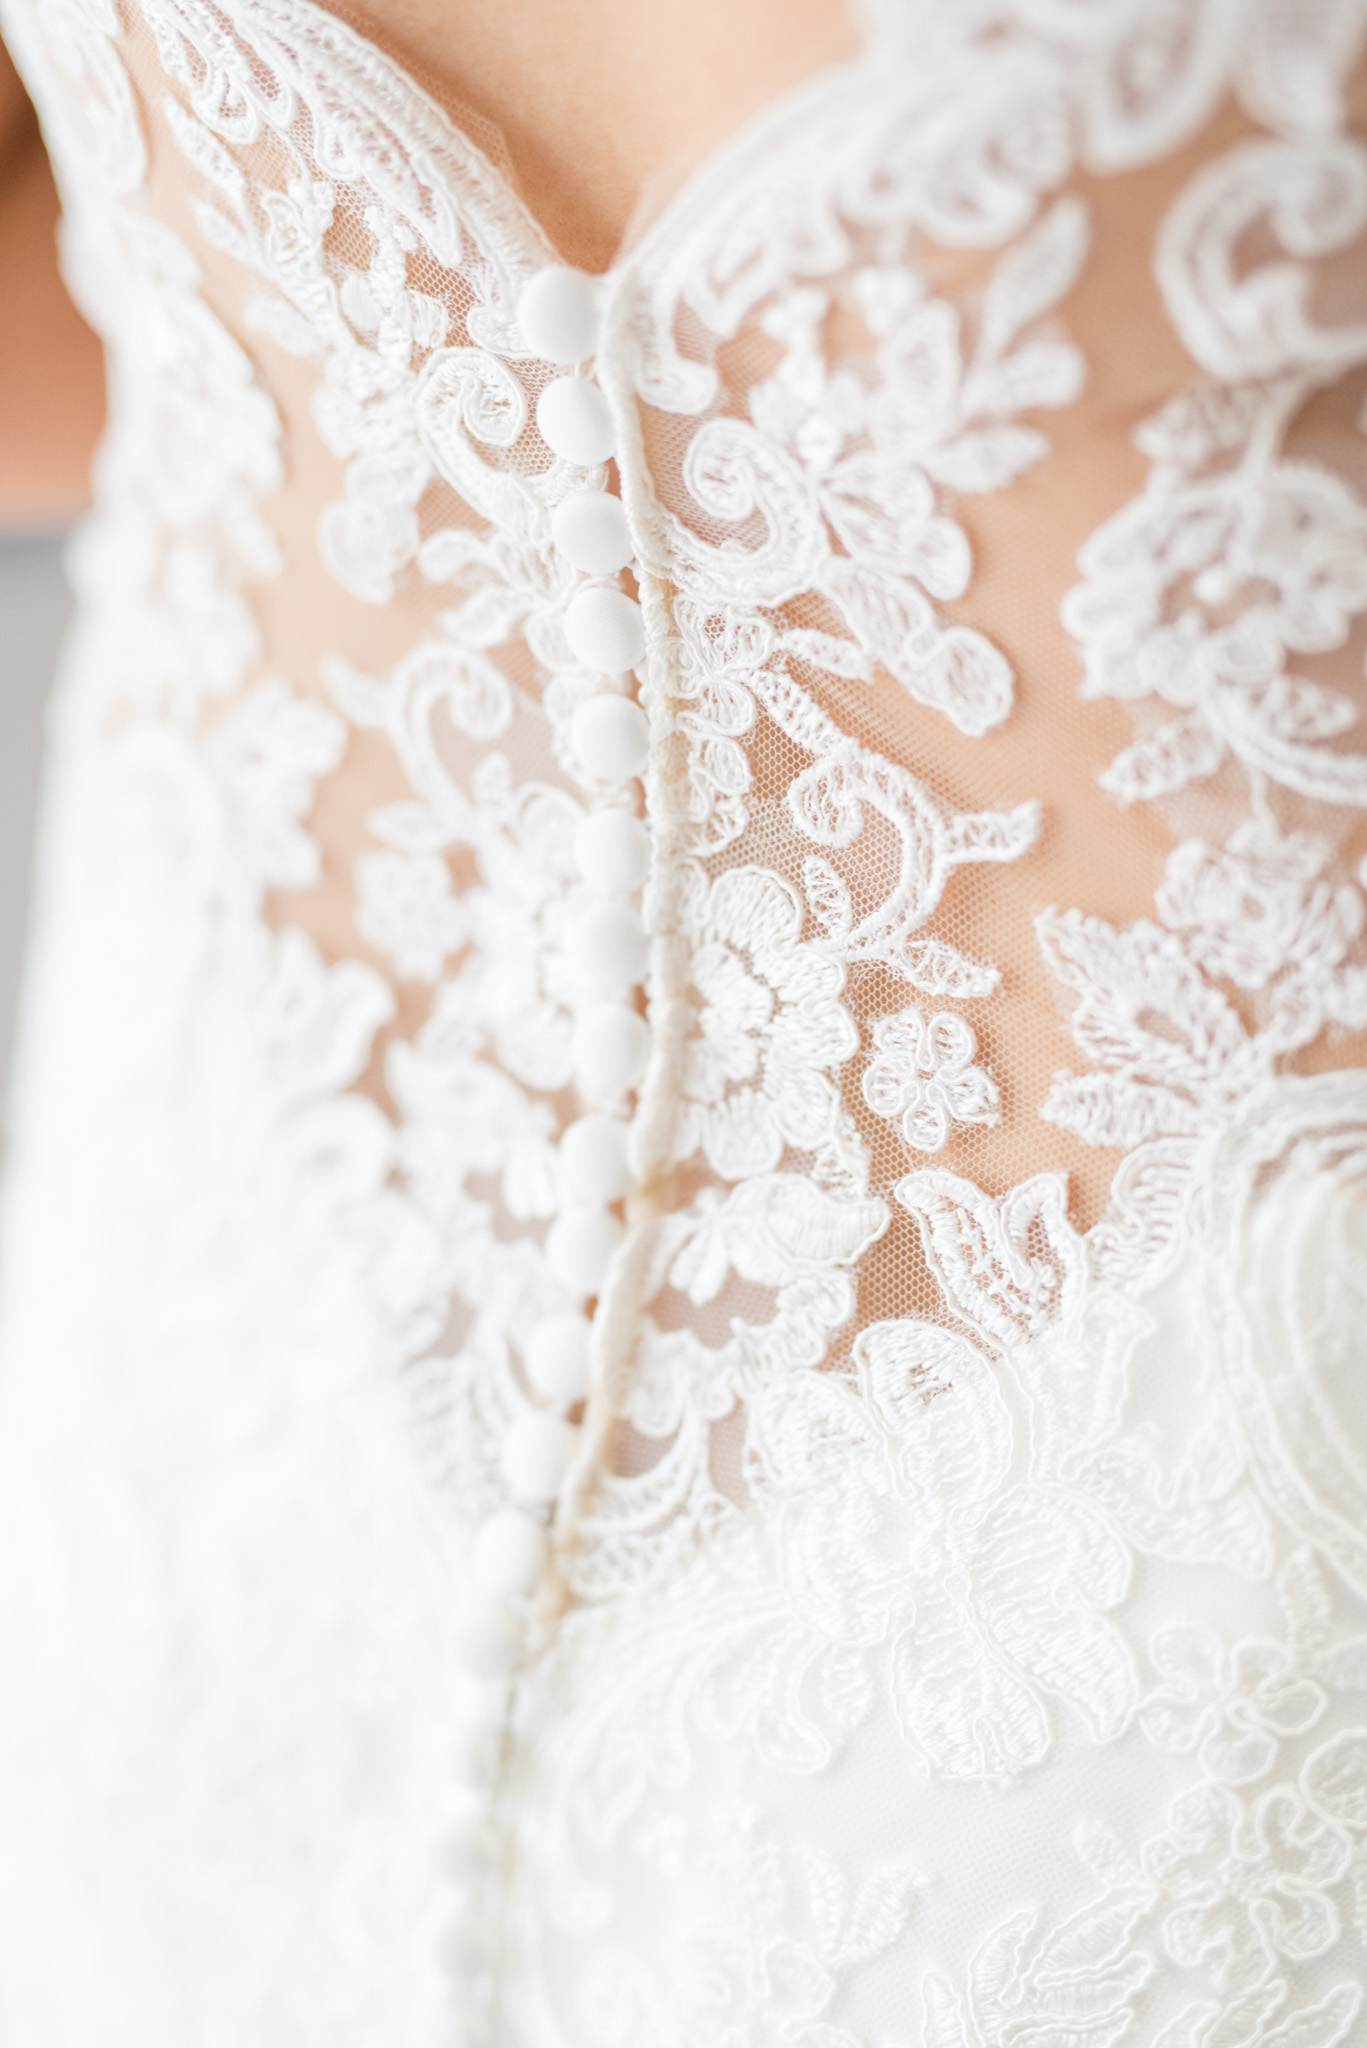 Lace buttons on back of wedding dress.